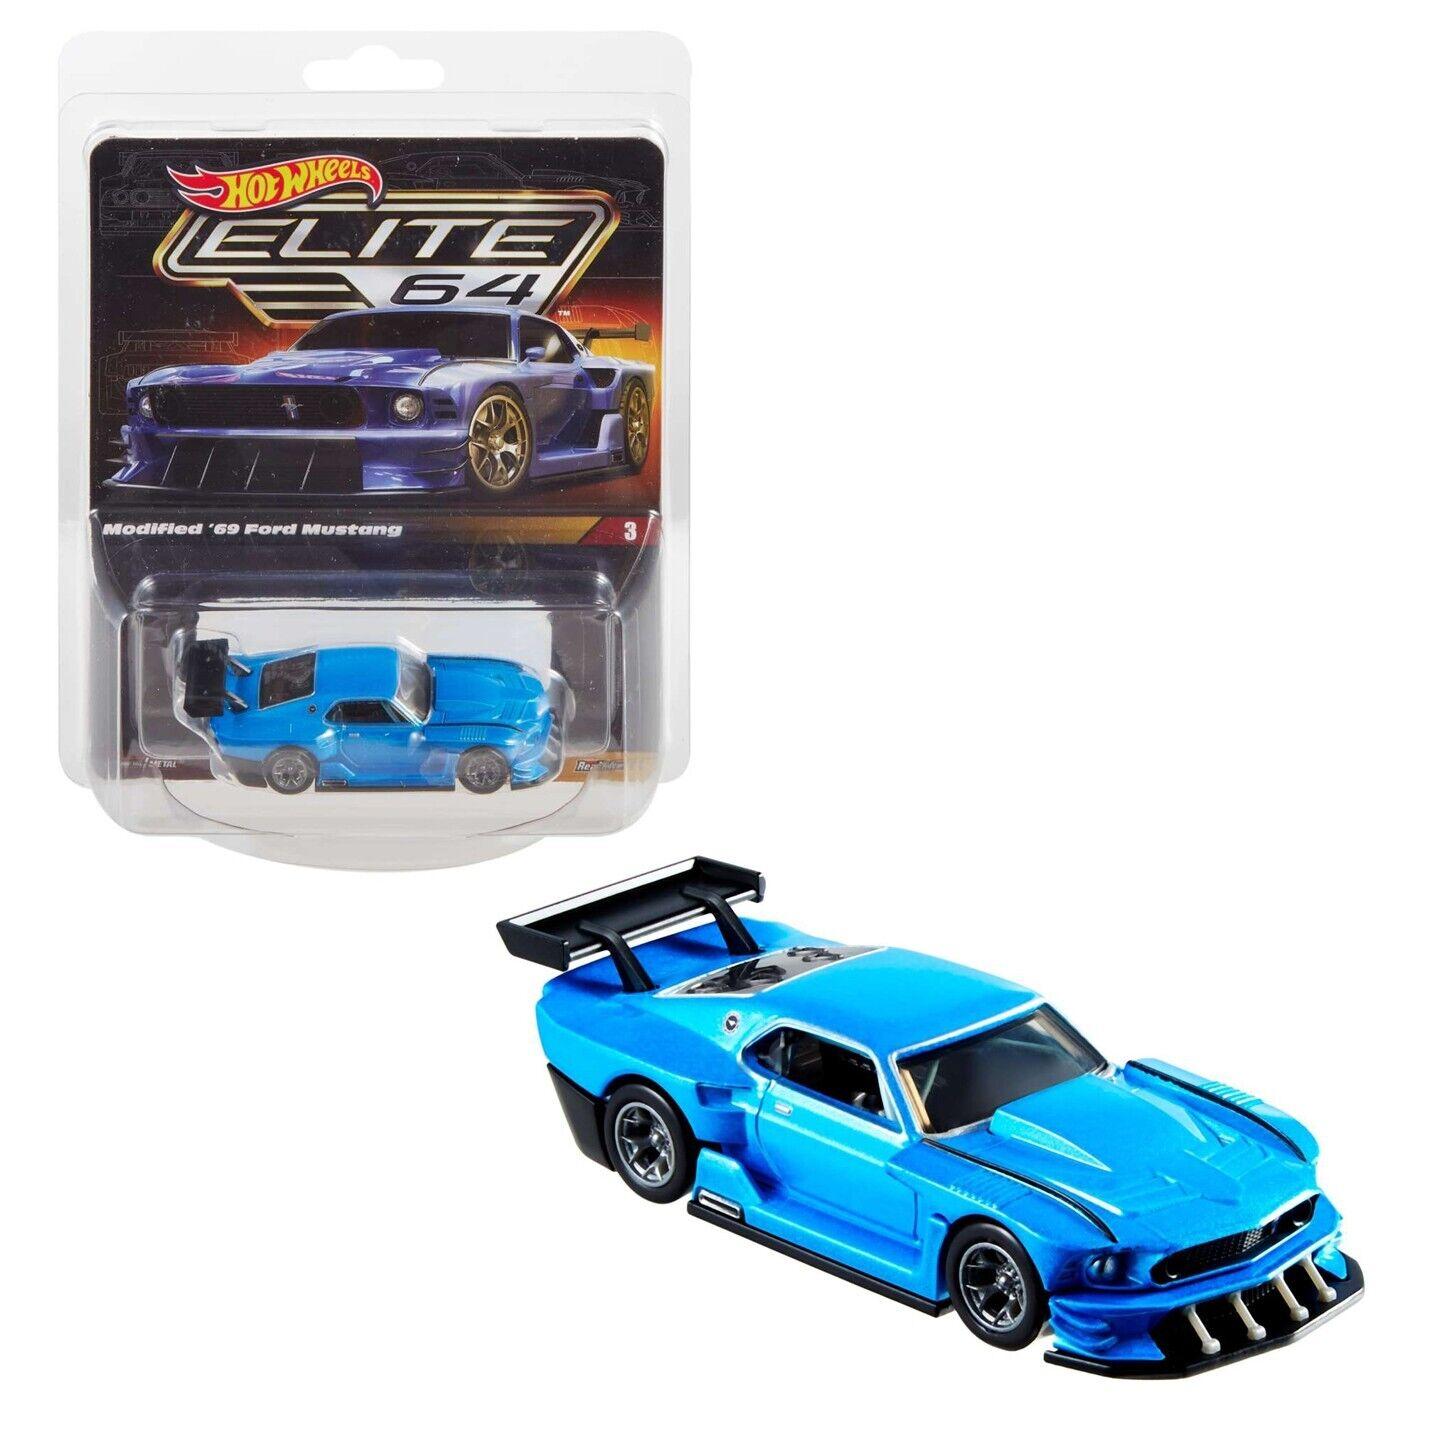 1:64 Hot Wheels Elite 64 Series Modified 1969 Ford Mustang Coupe blue metallic HGW13